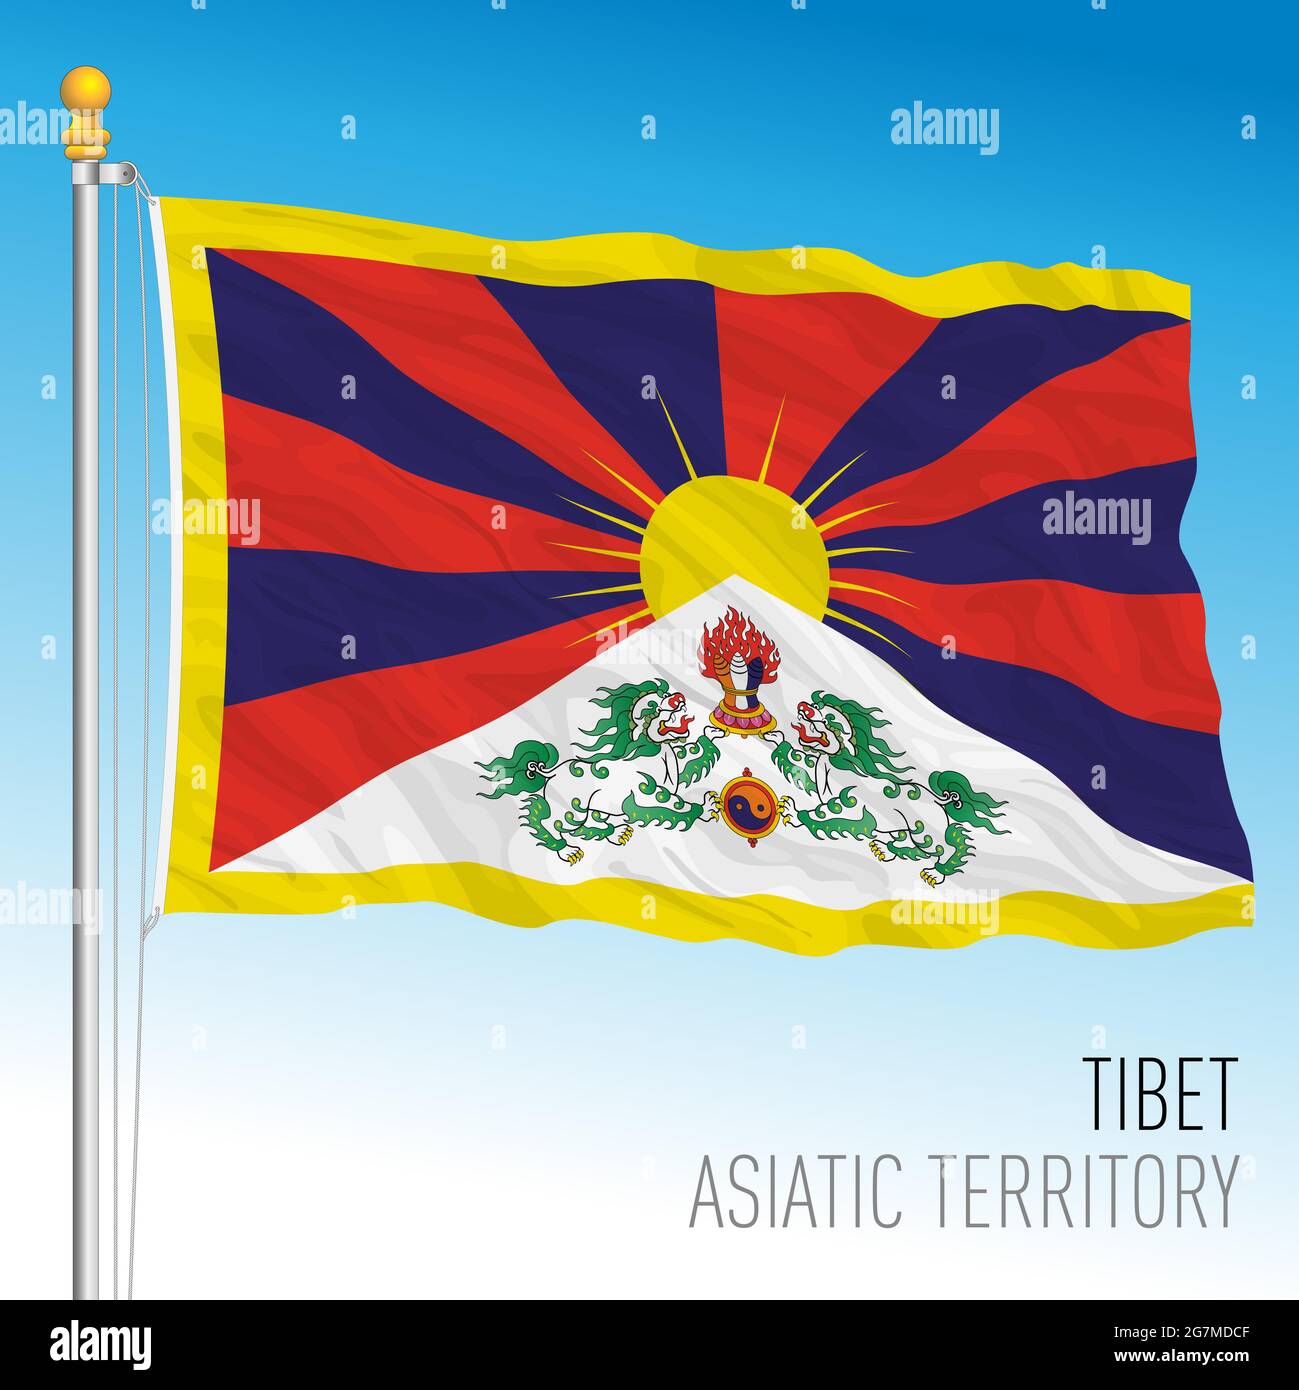 Tibet official national flag, asiatic territory, vector illustration Stock Vector